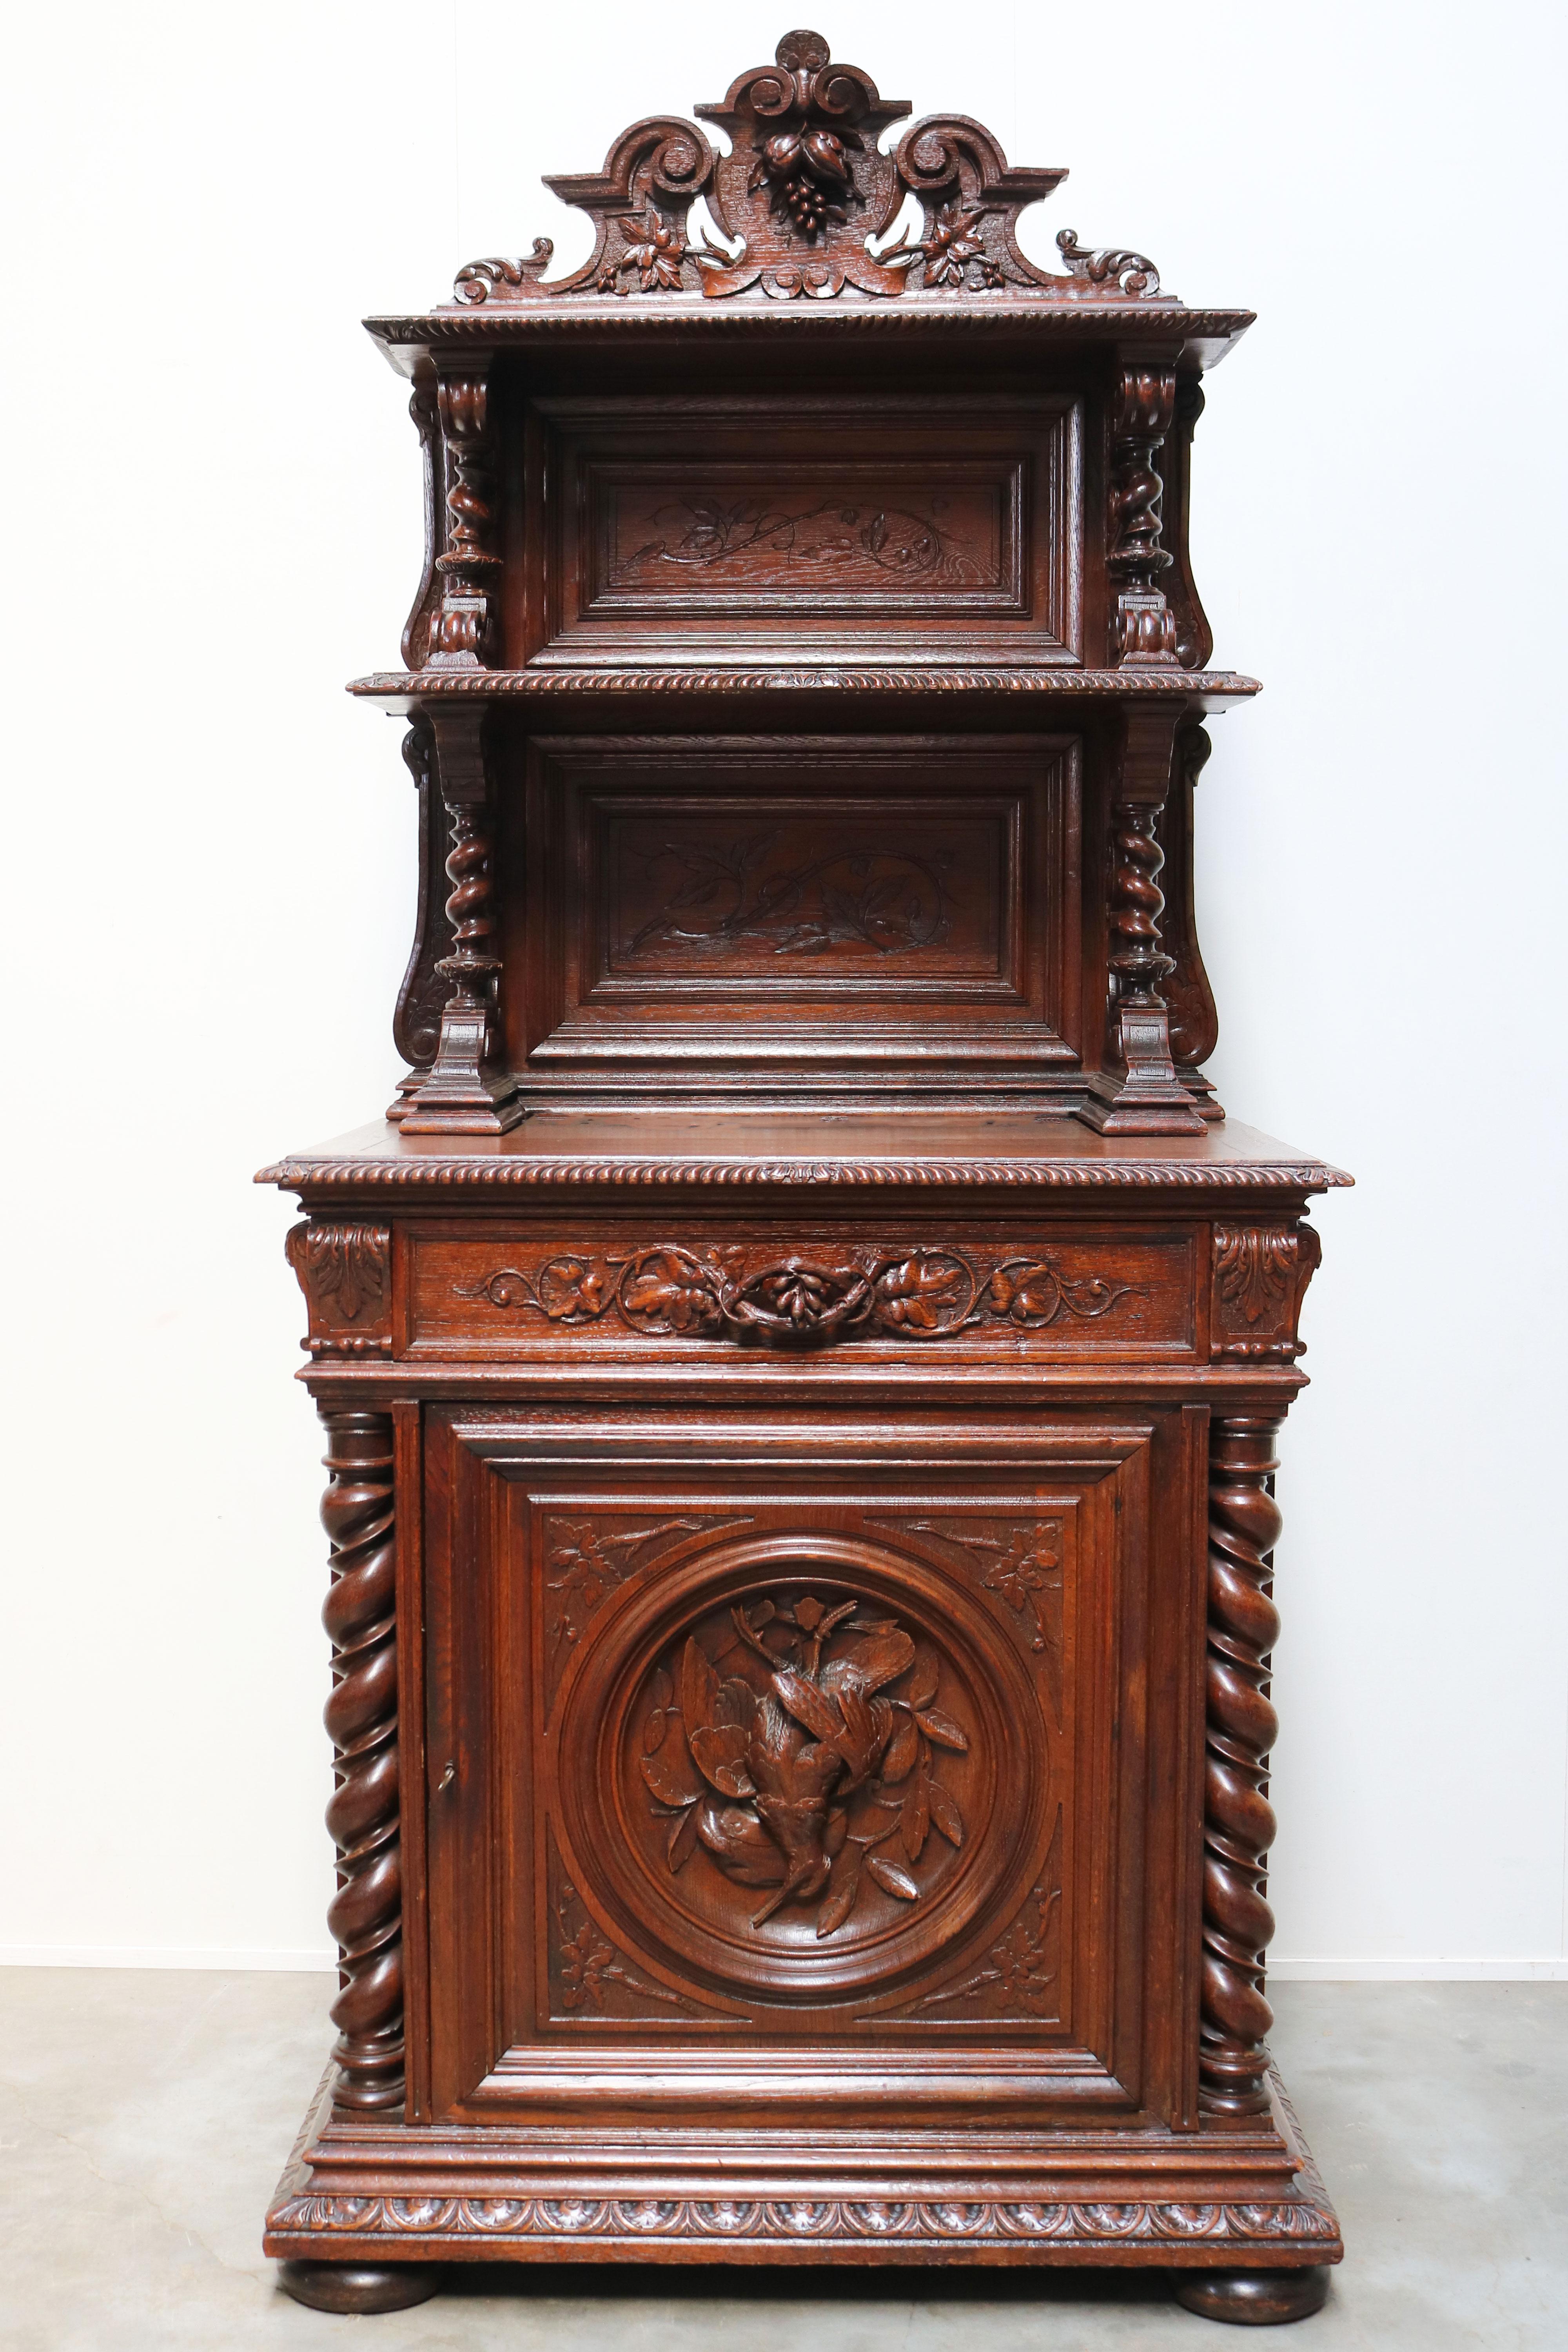 Carved Rare Antique French 19th Century Hunting Cabinet / Black Forest Barley Twist Oak For Sale